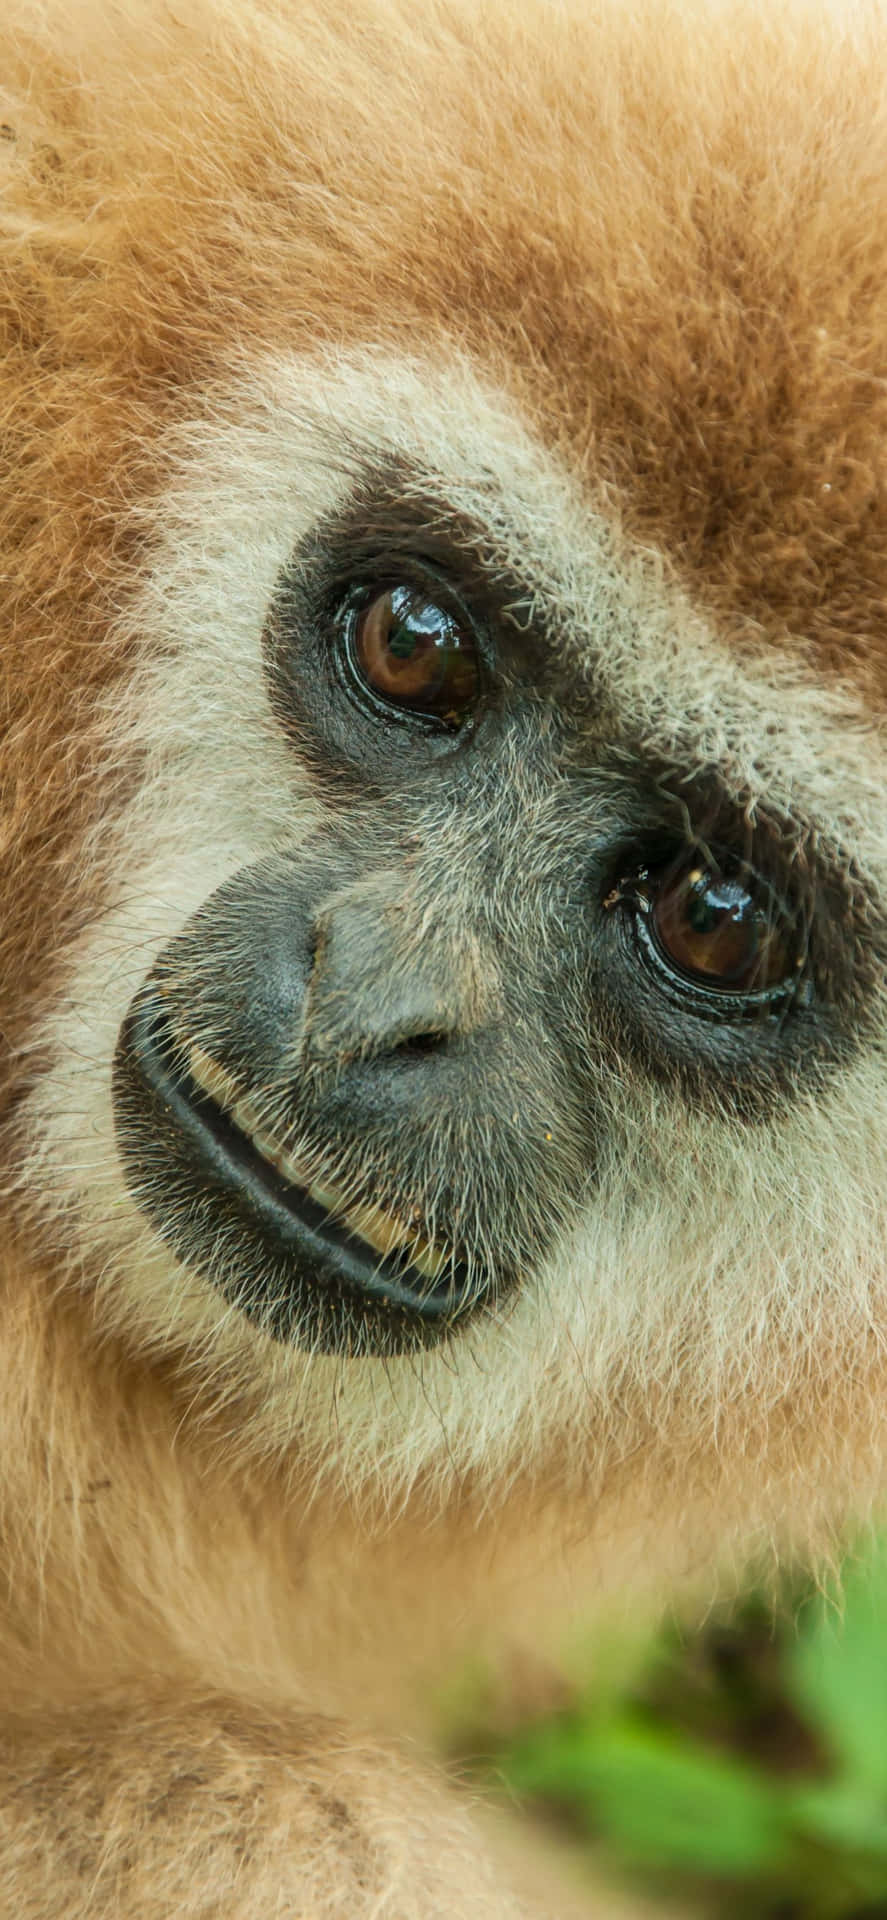 "Introducing the gorgeous new Iphone Xs Max Gibbon!"